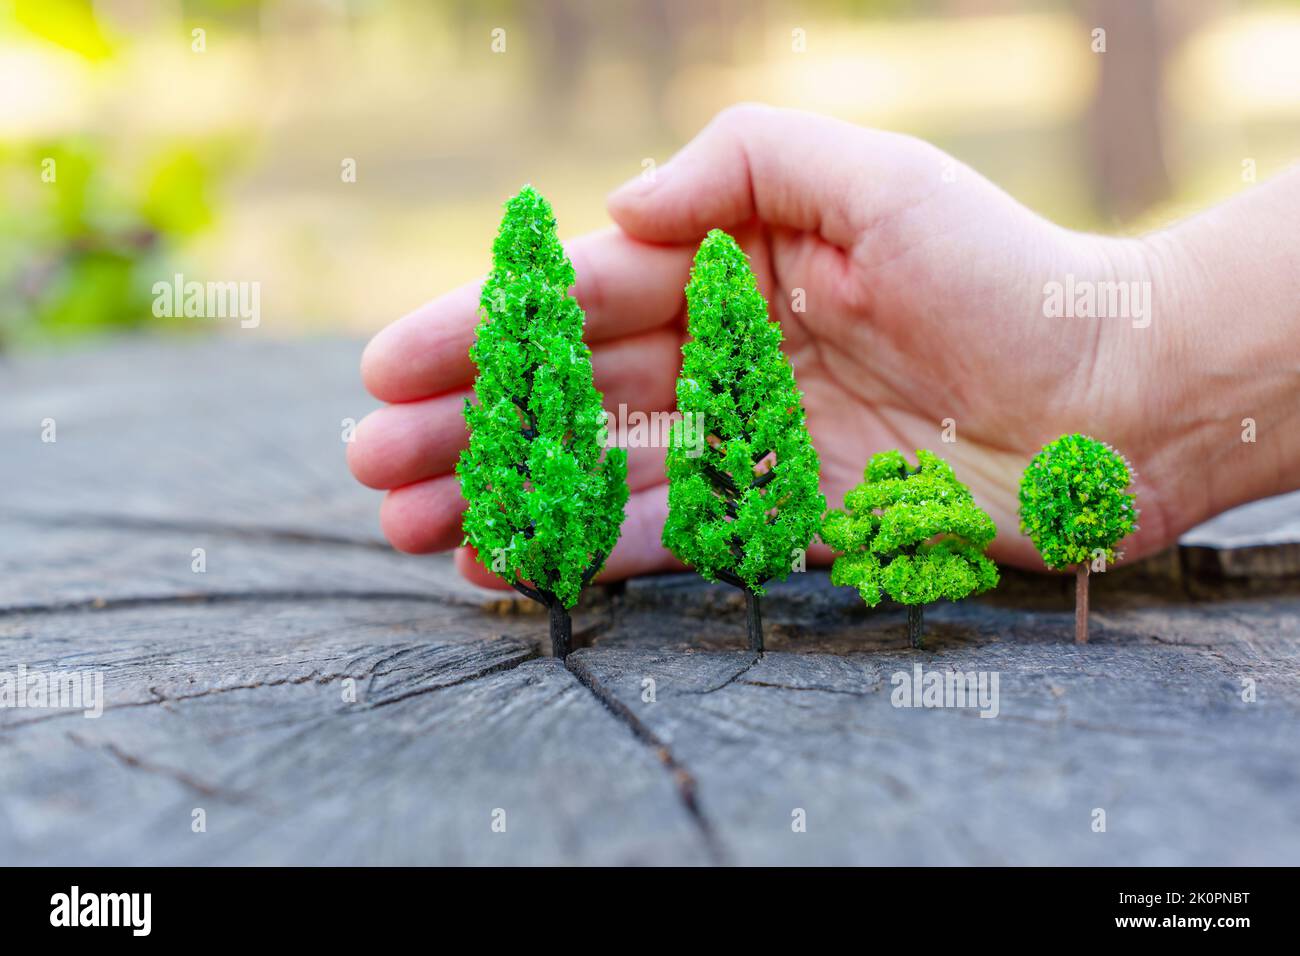 Hand shields toy trees growing on a tree stump in the woods. Creative forest planting and protection concept. Stock Photo